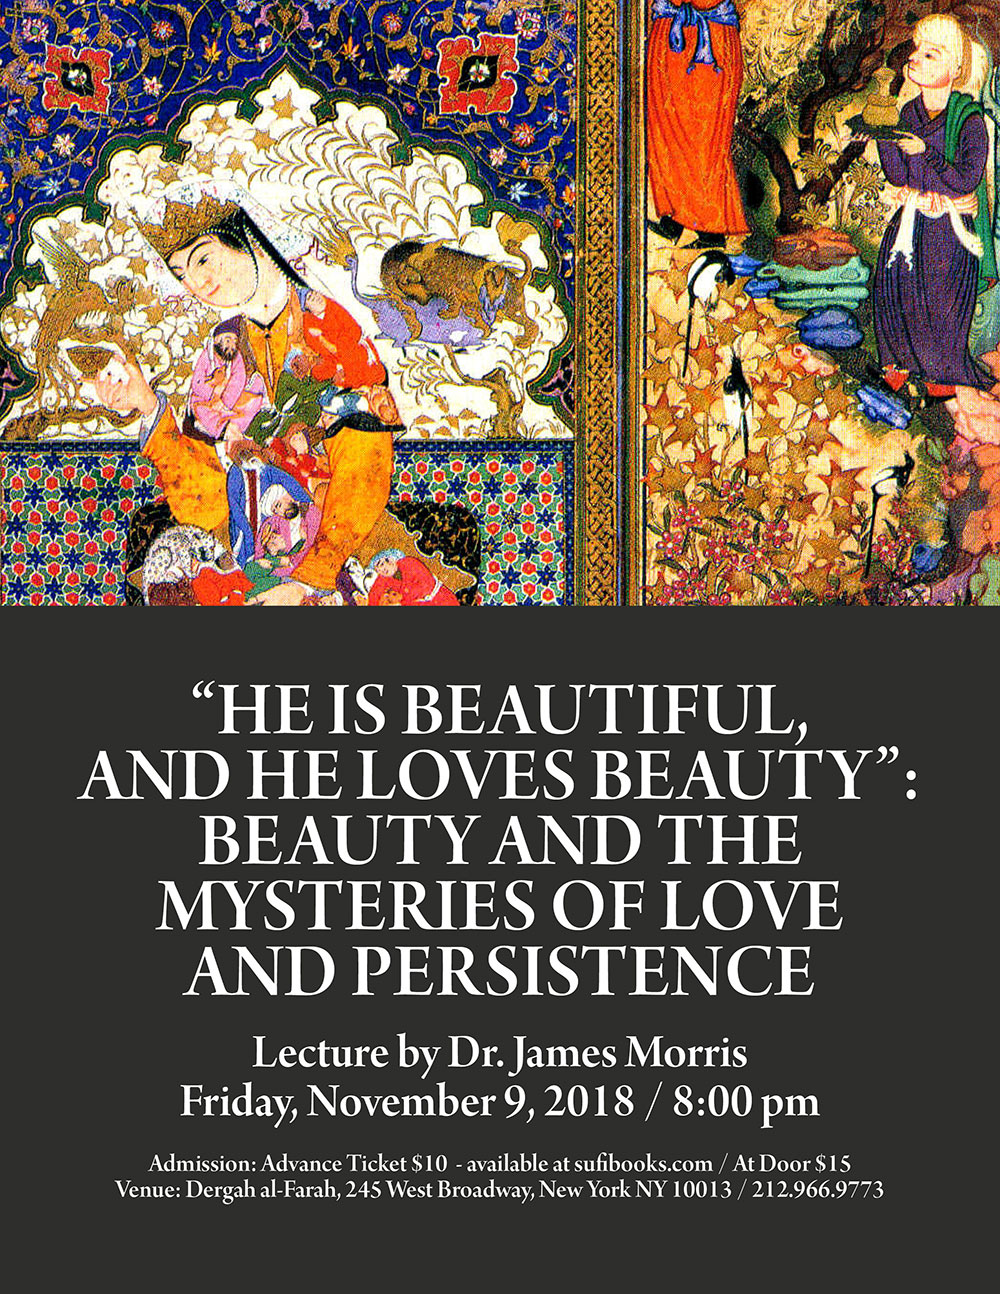 Friday, November 9, 2018 | “He is beautiful,  and He loves beauty”: Beauty and the  Mysteries of Love and Persistence |  Lecture by Dr. James Morris | 8:00 pm | Admission $15 – Tickets available at door